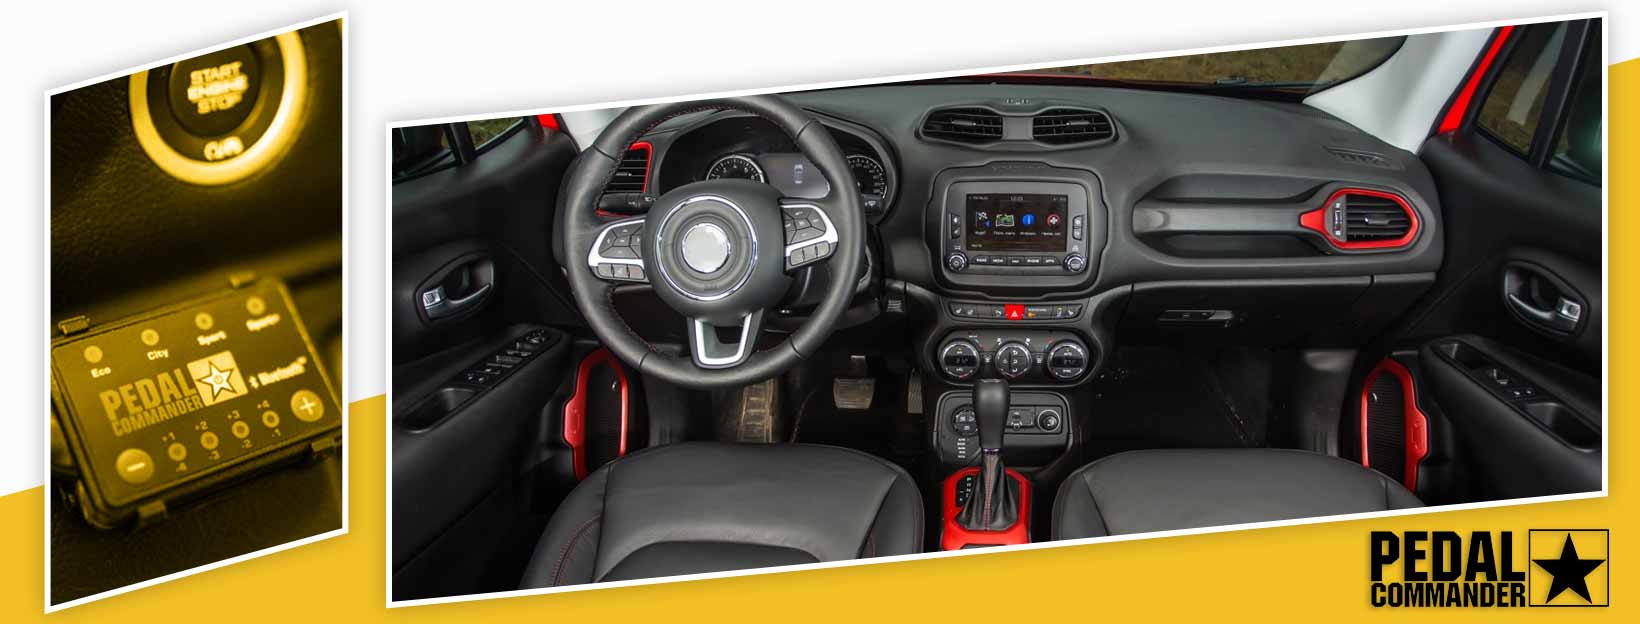 Pedal Commander for Jeep Renegade - interior